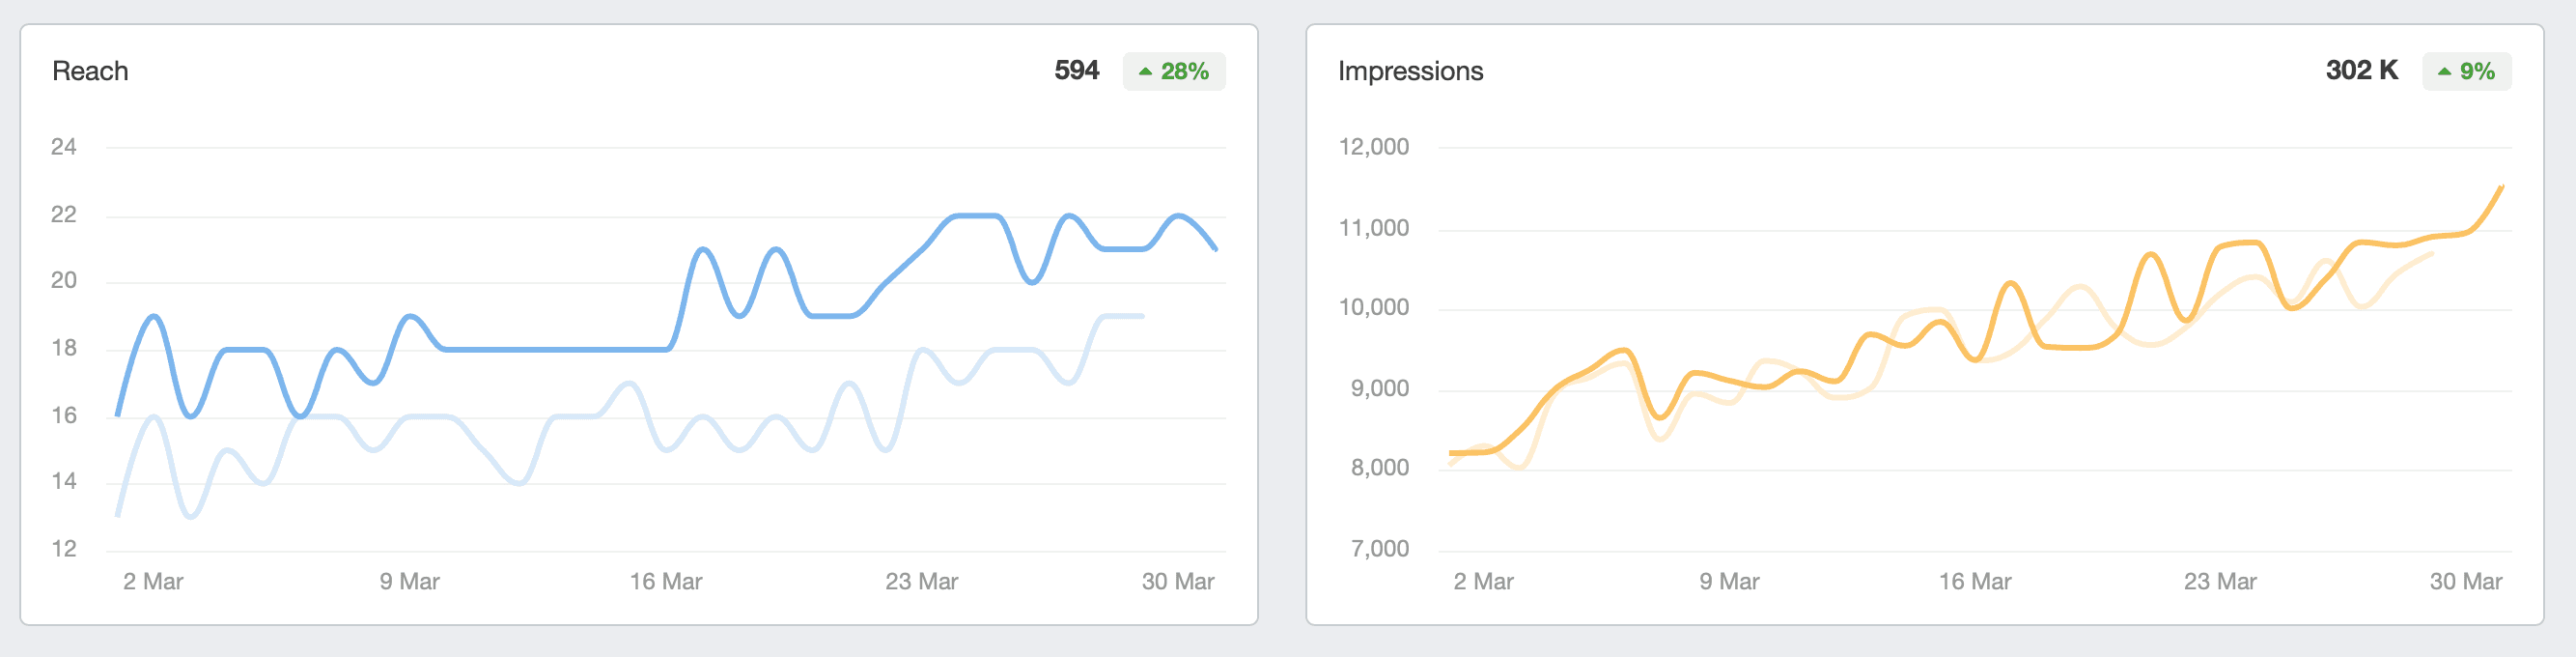 Instagram reach and impressions graphs